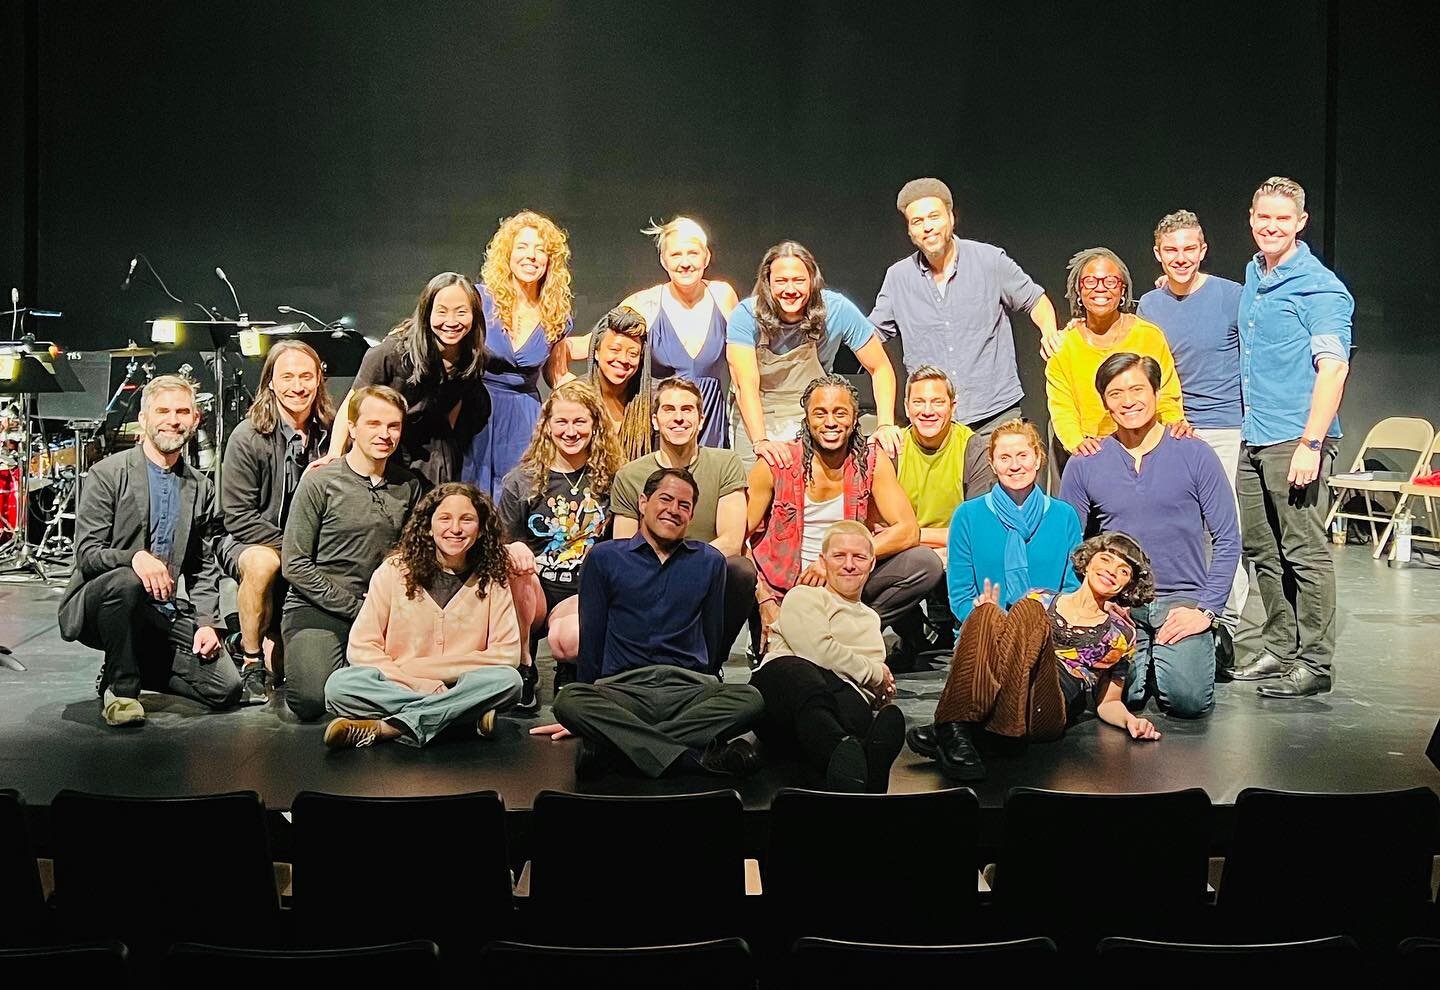 I had the best time with that @theatlantismusical crew last week! What a wonderful group of performers and musicians. Thank you for your heart, musicianship, and talent. And a special thanks to my awesome collaborators @matthewleerobinson @scottander